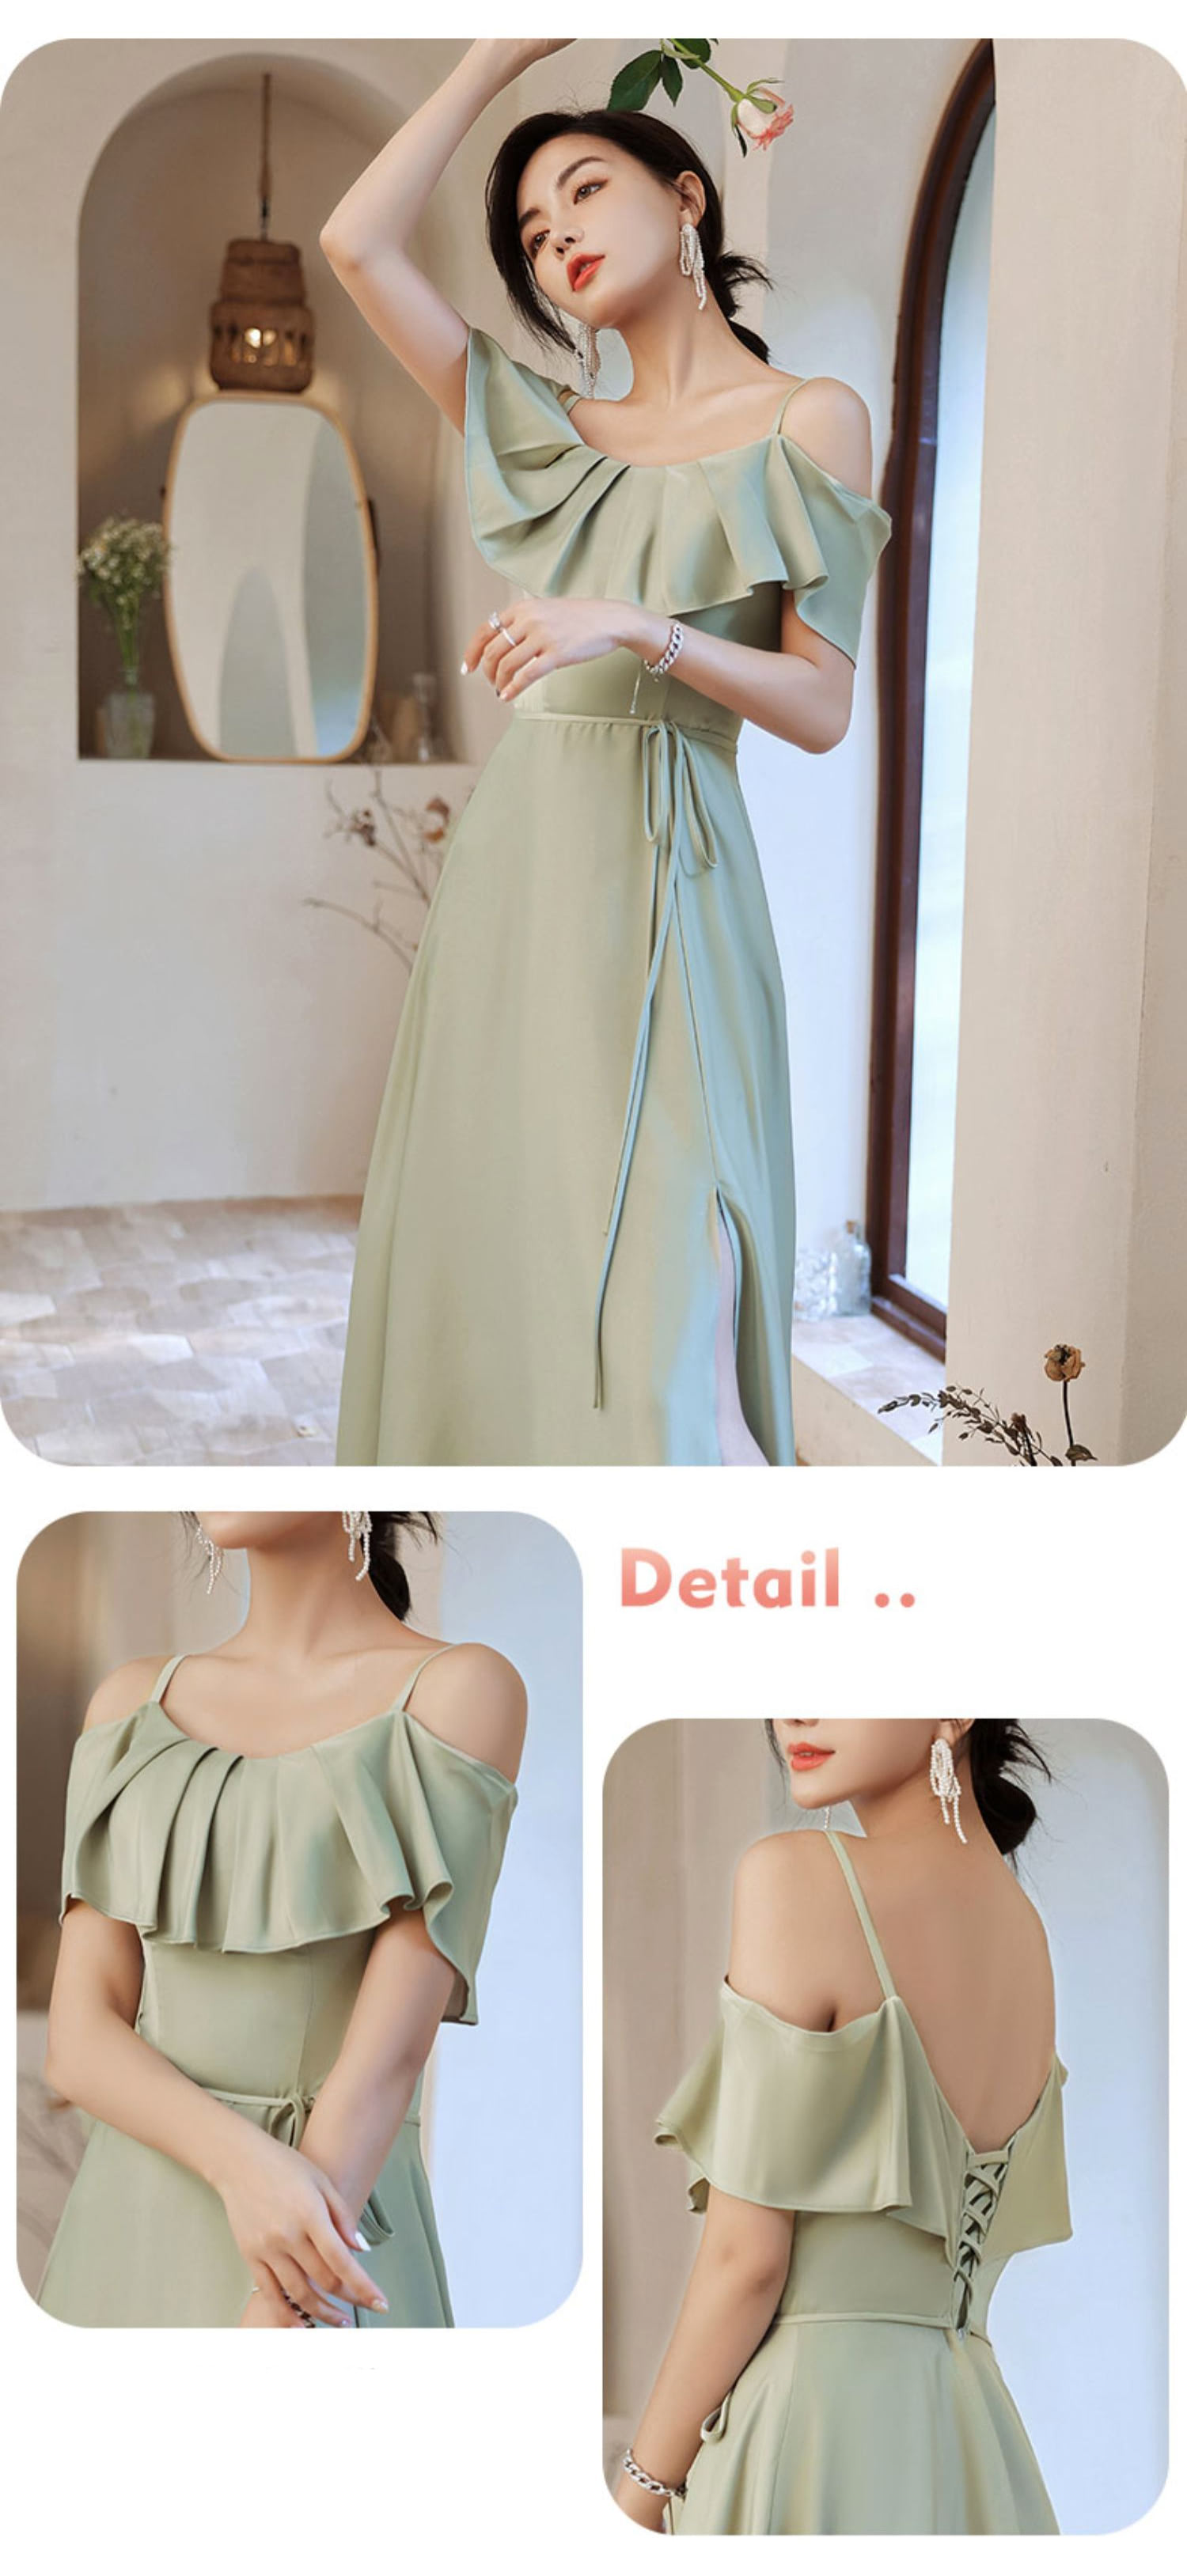 Simple-Olive-Green-Satin-Bridesmaid-Dress-Beach-Wedding-Guest-Outfit20